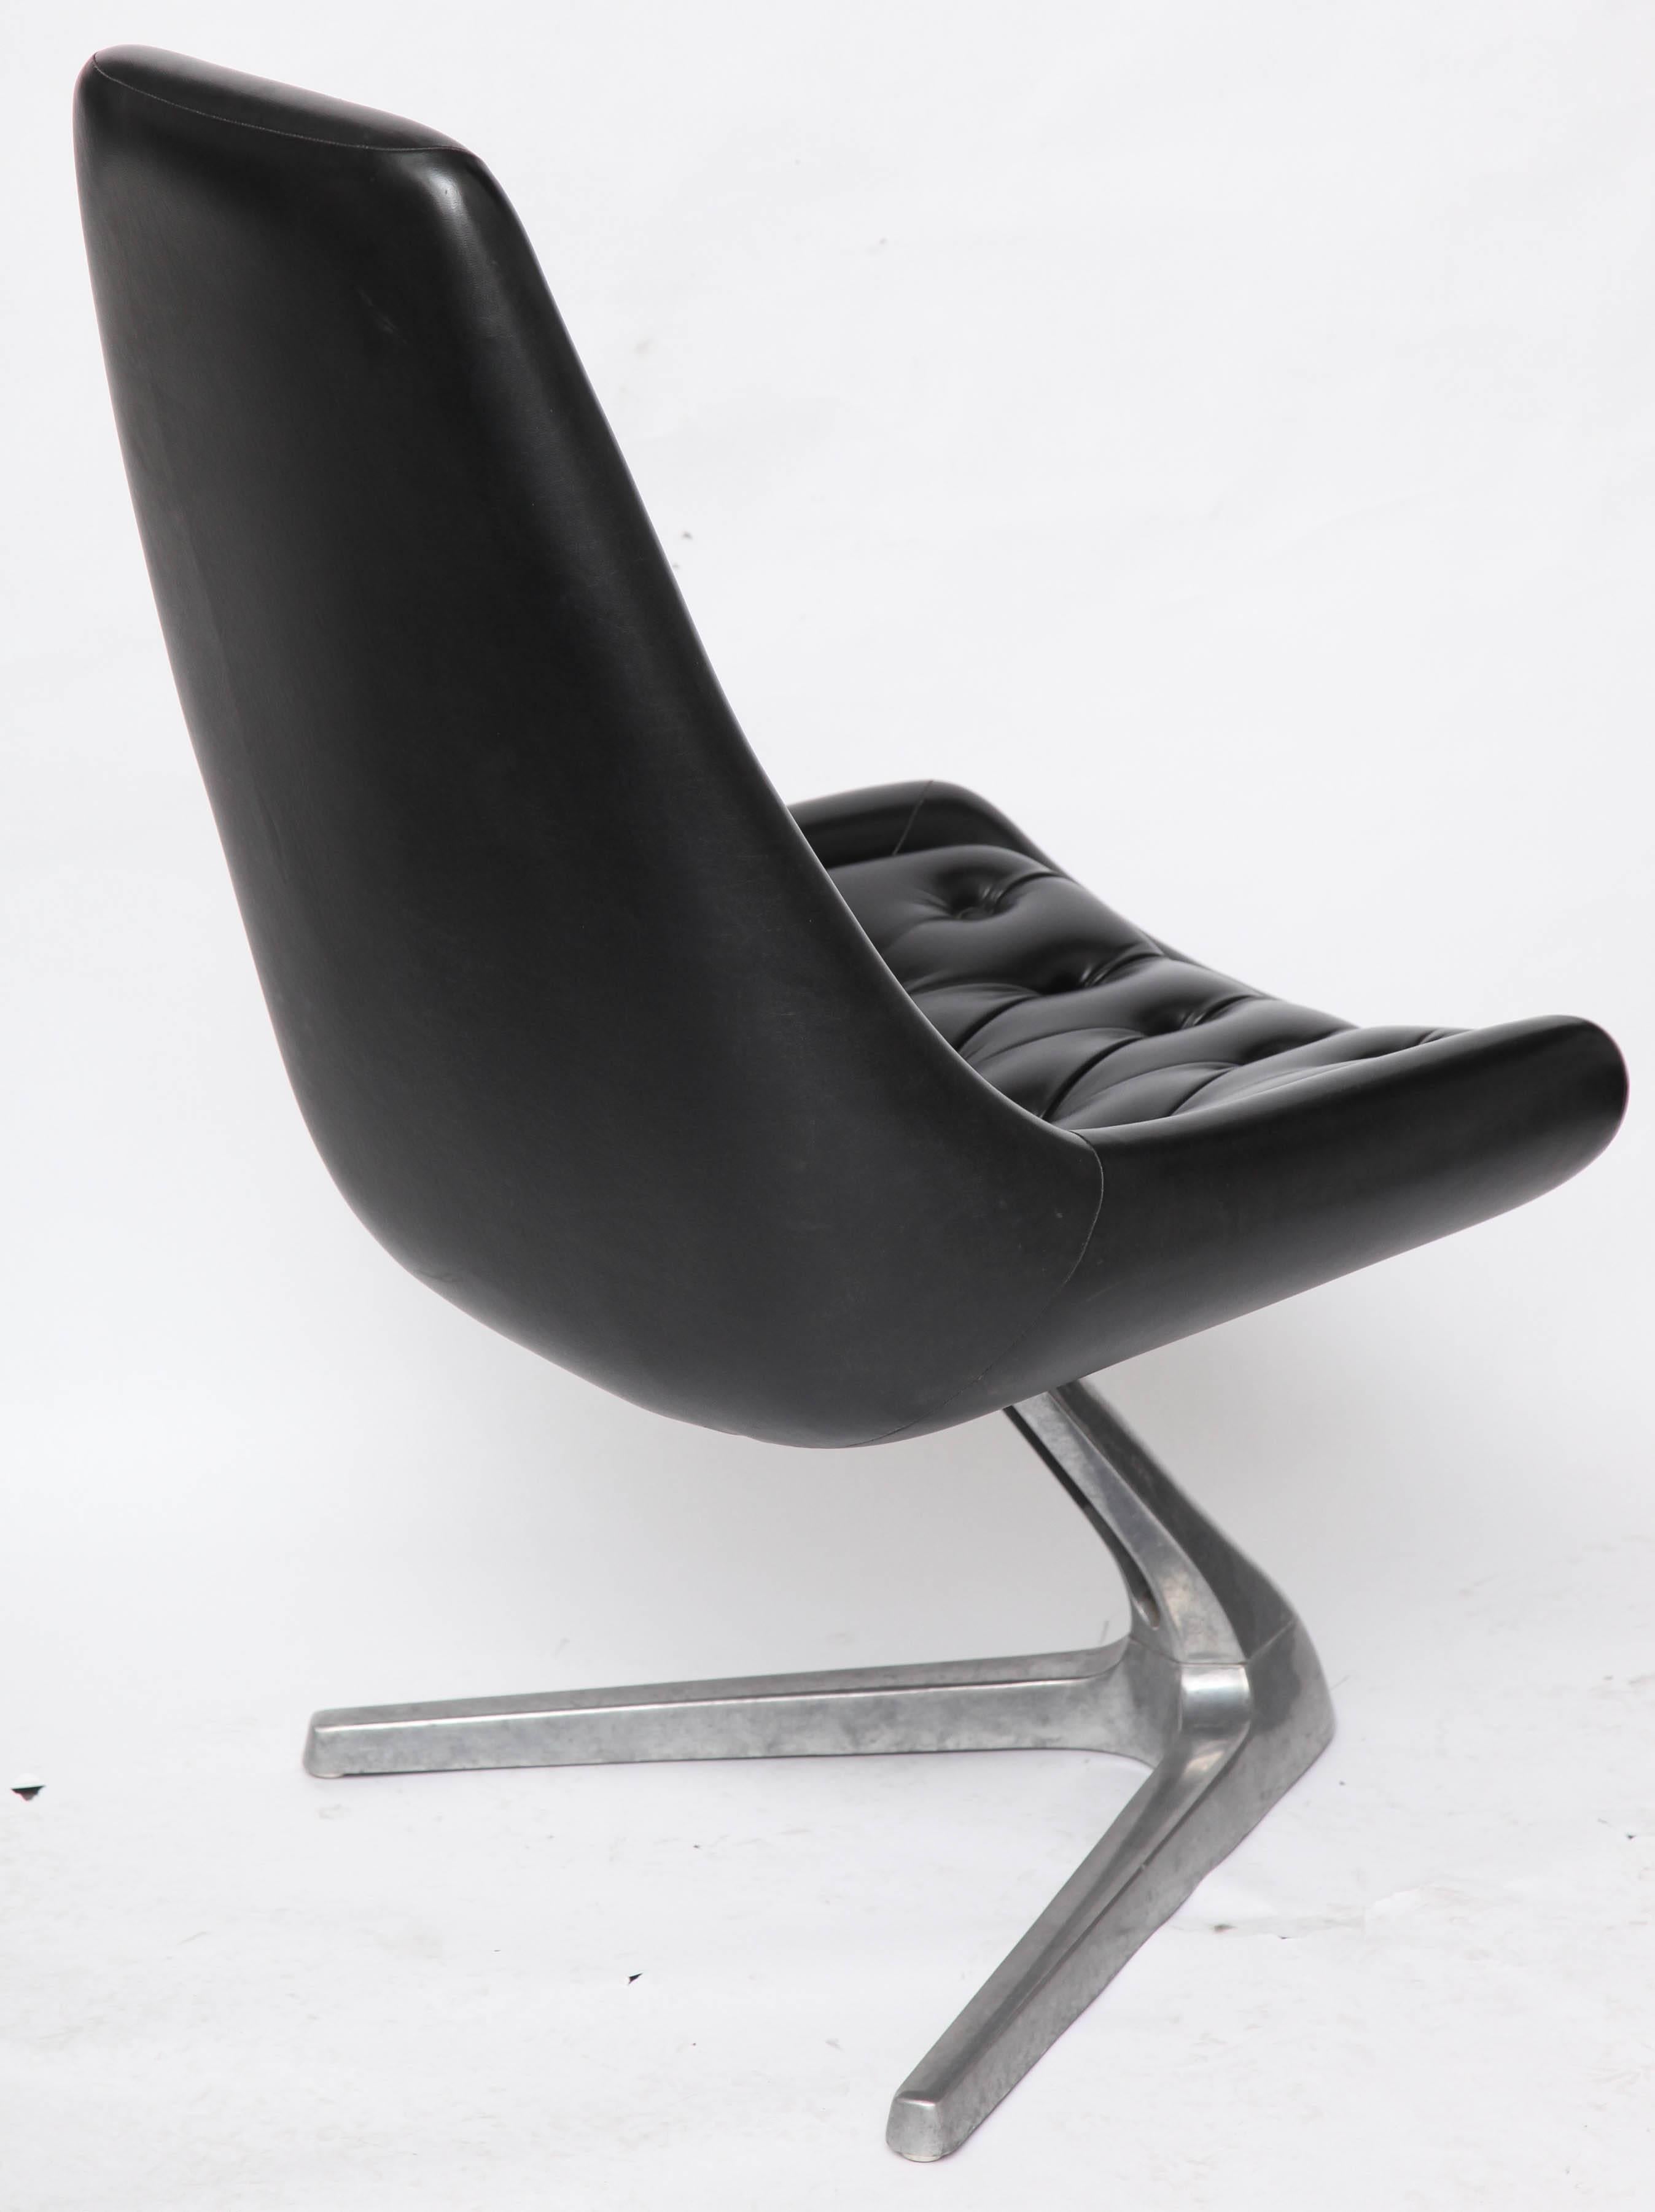 Late 20th Century Set of Four Modernist 1970s Futuristic Chairs